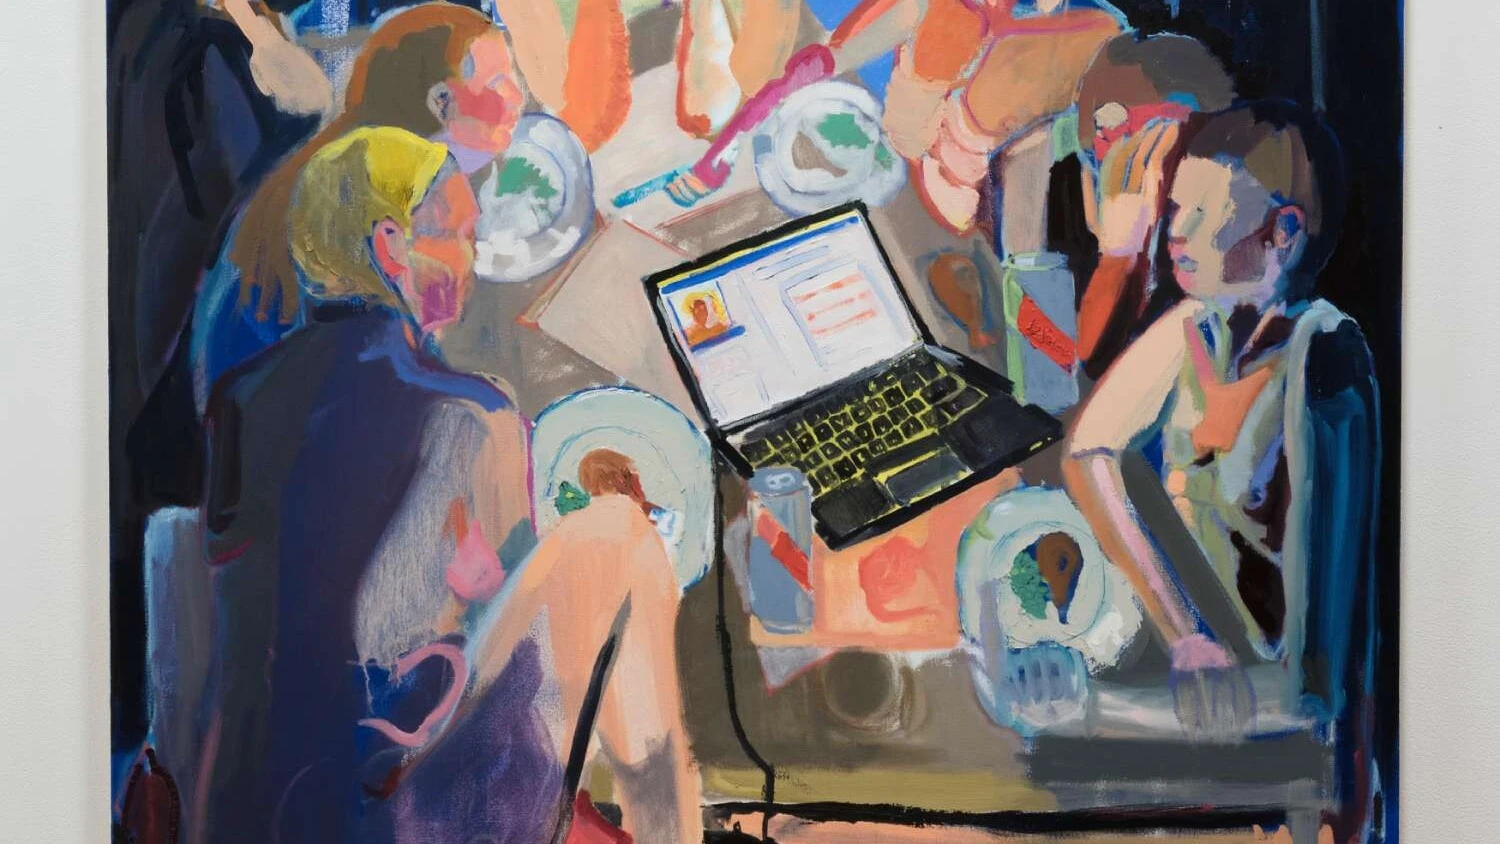 An abstract painting on exhibition showing various figures around a table with a laptop in the center